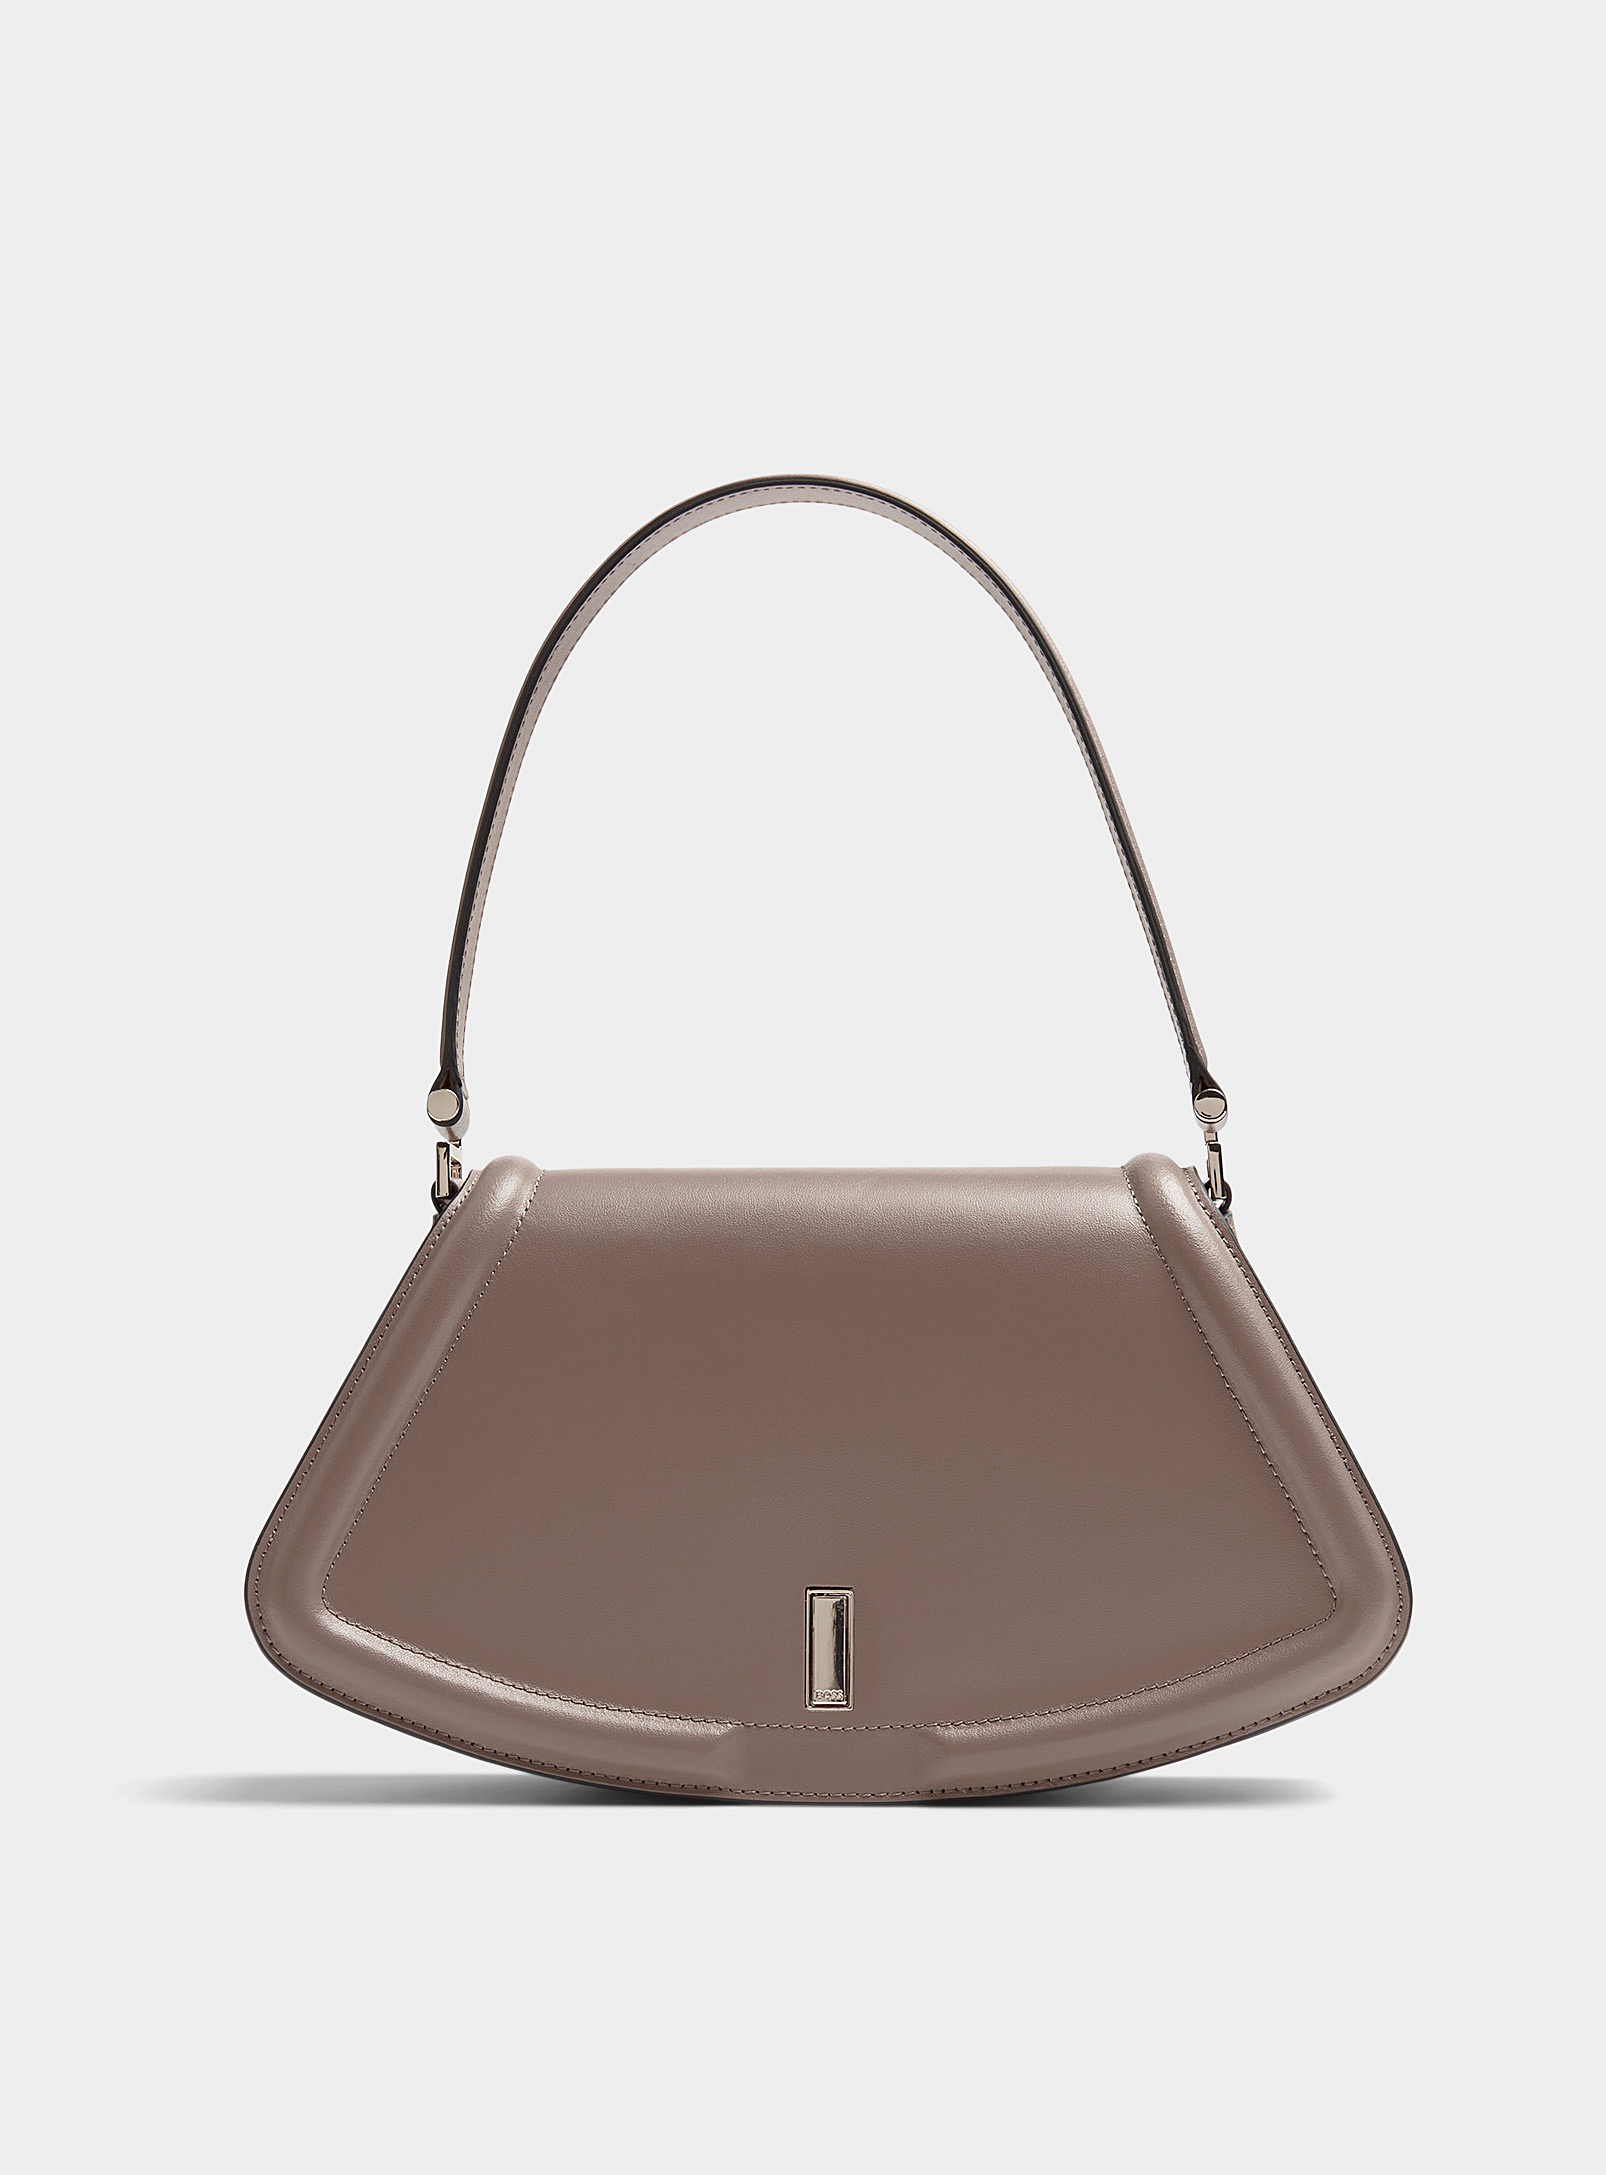 Hugo Boss Ariell Structured Leather Baguette Bag In Light Brown